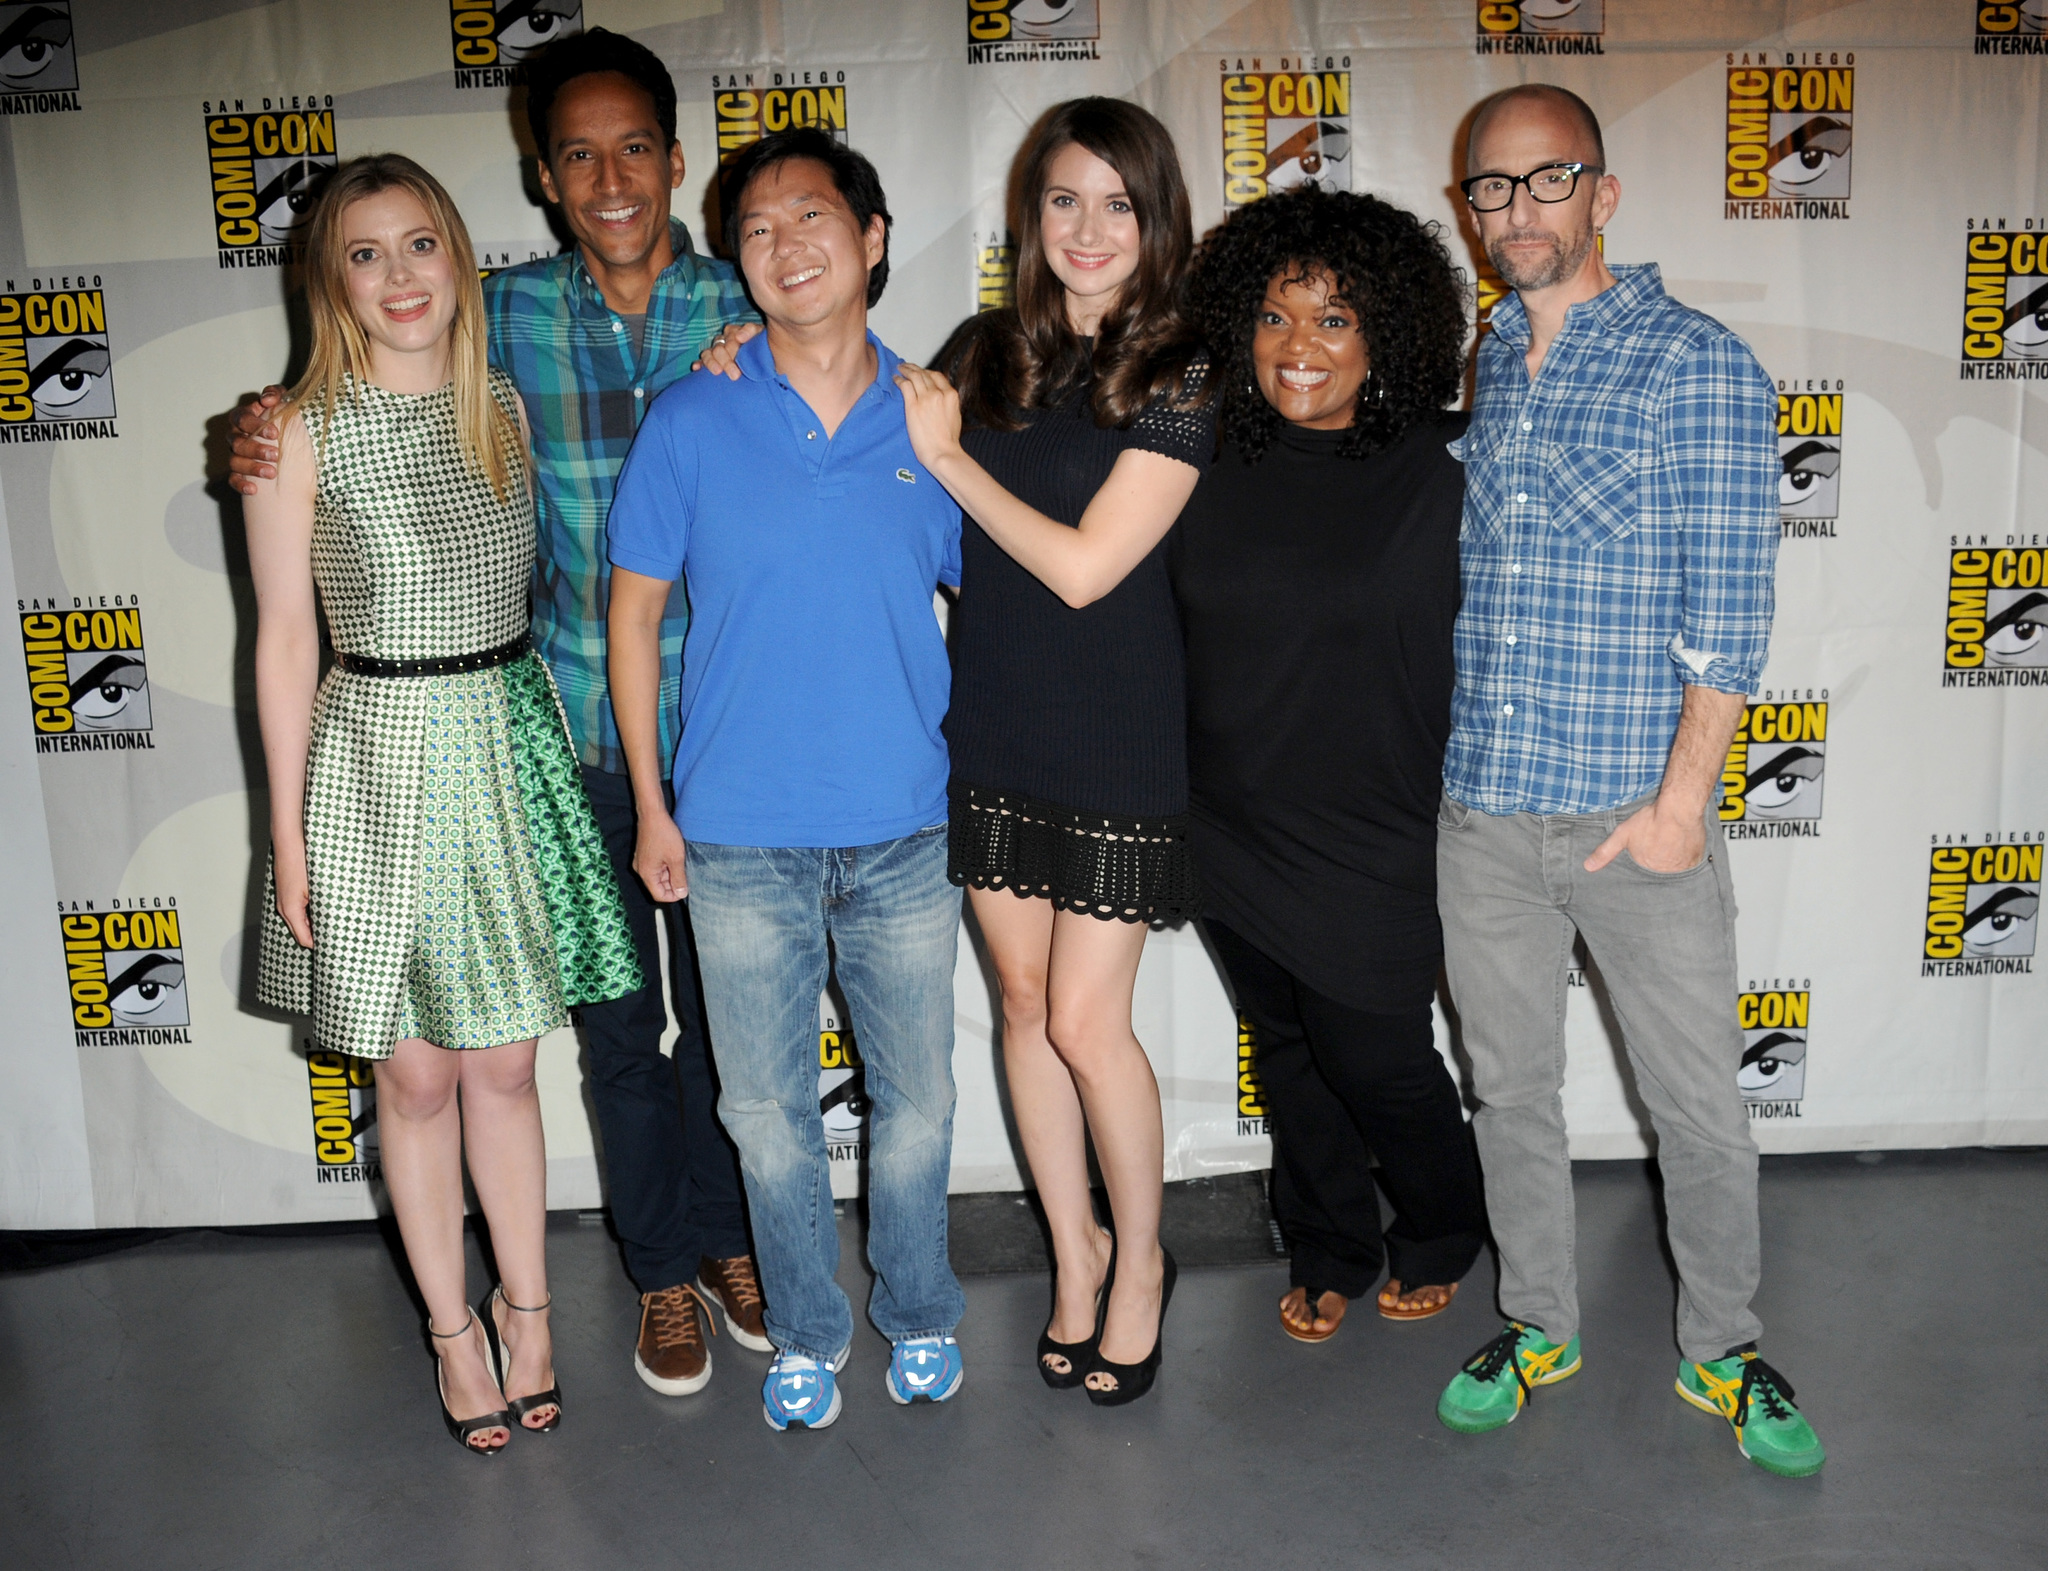 Ken Jeong, Yvette Nicole Brown, Alison Brie, Gillian Jacobs and Danny Pudi at event of Community (2009)